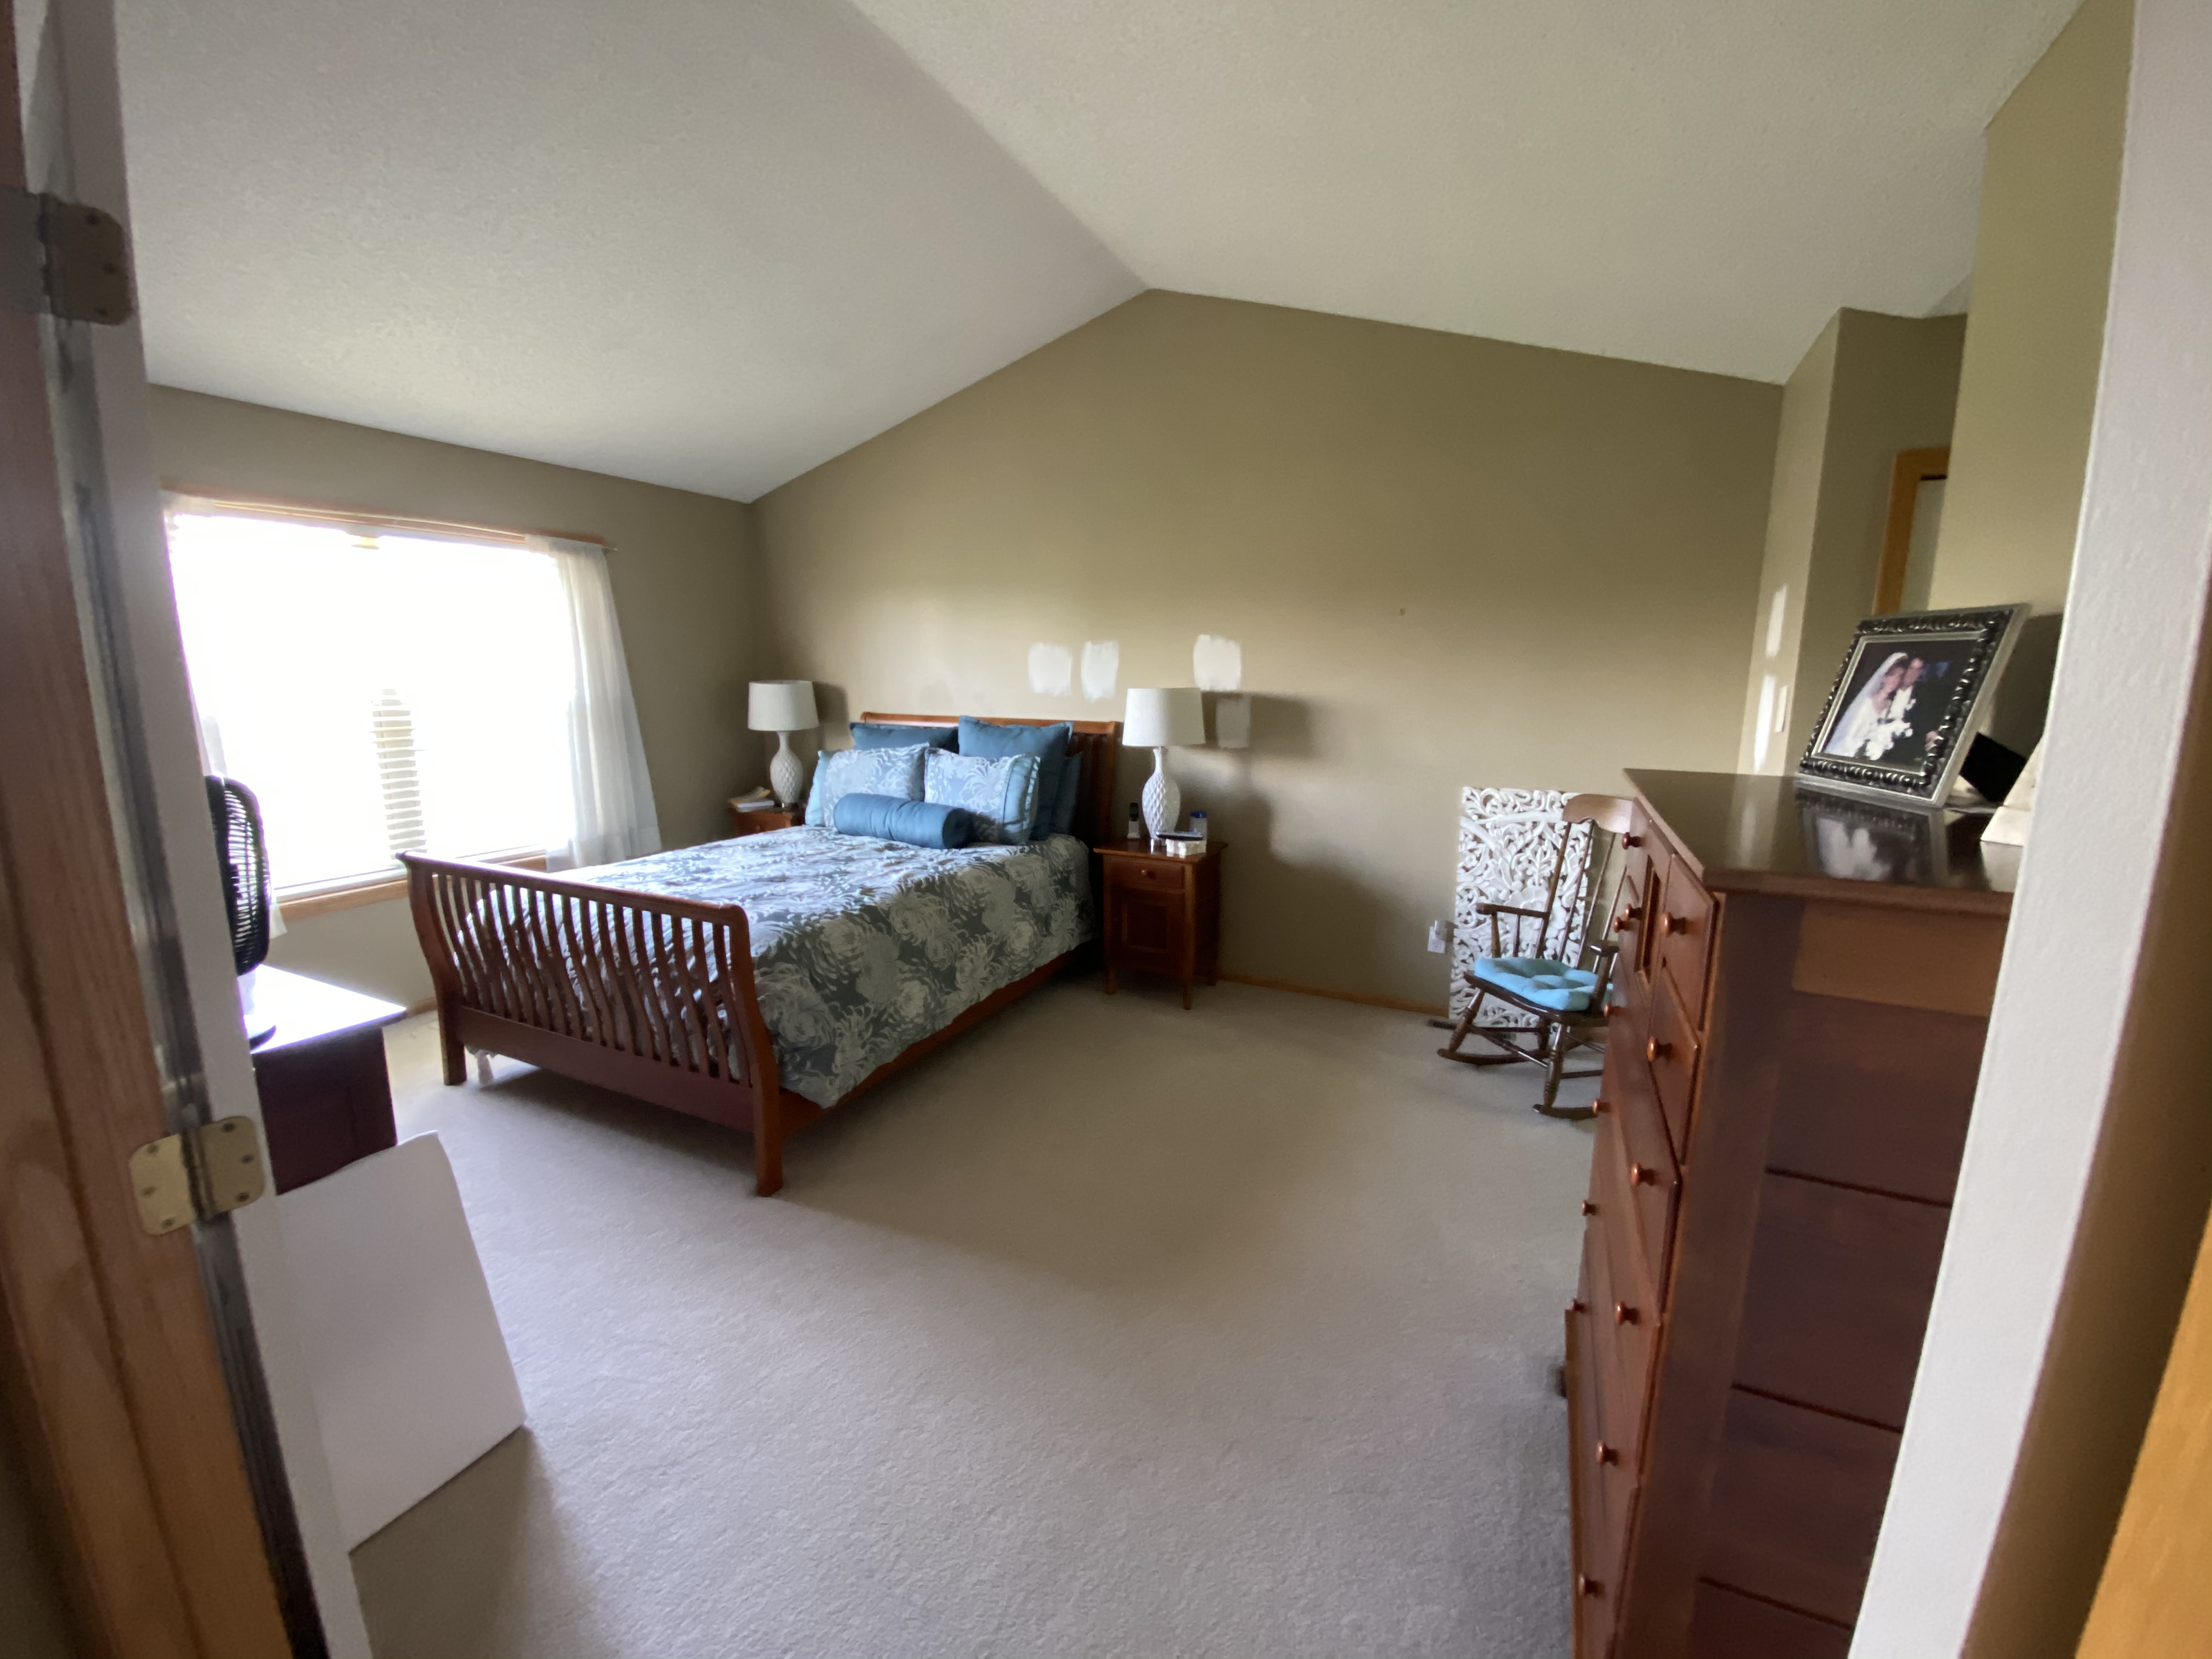 Before Photos - Farmington MN Owner's Suite Remodel by Lakeville Remodeler White Birch Design